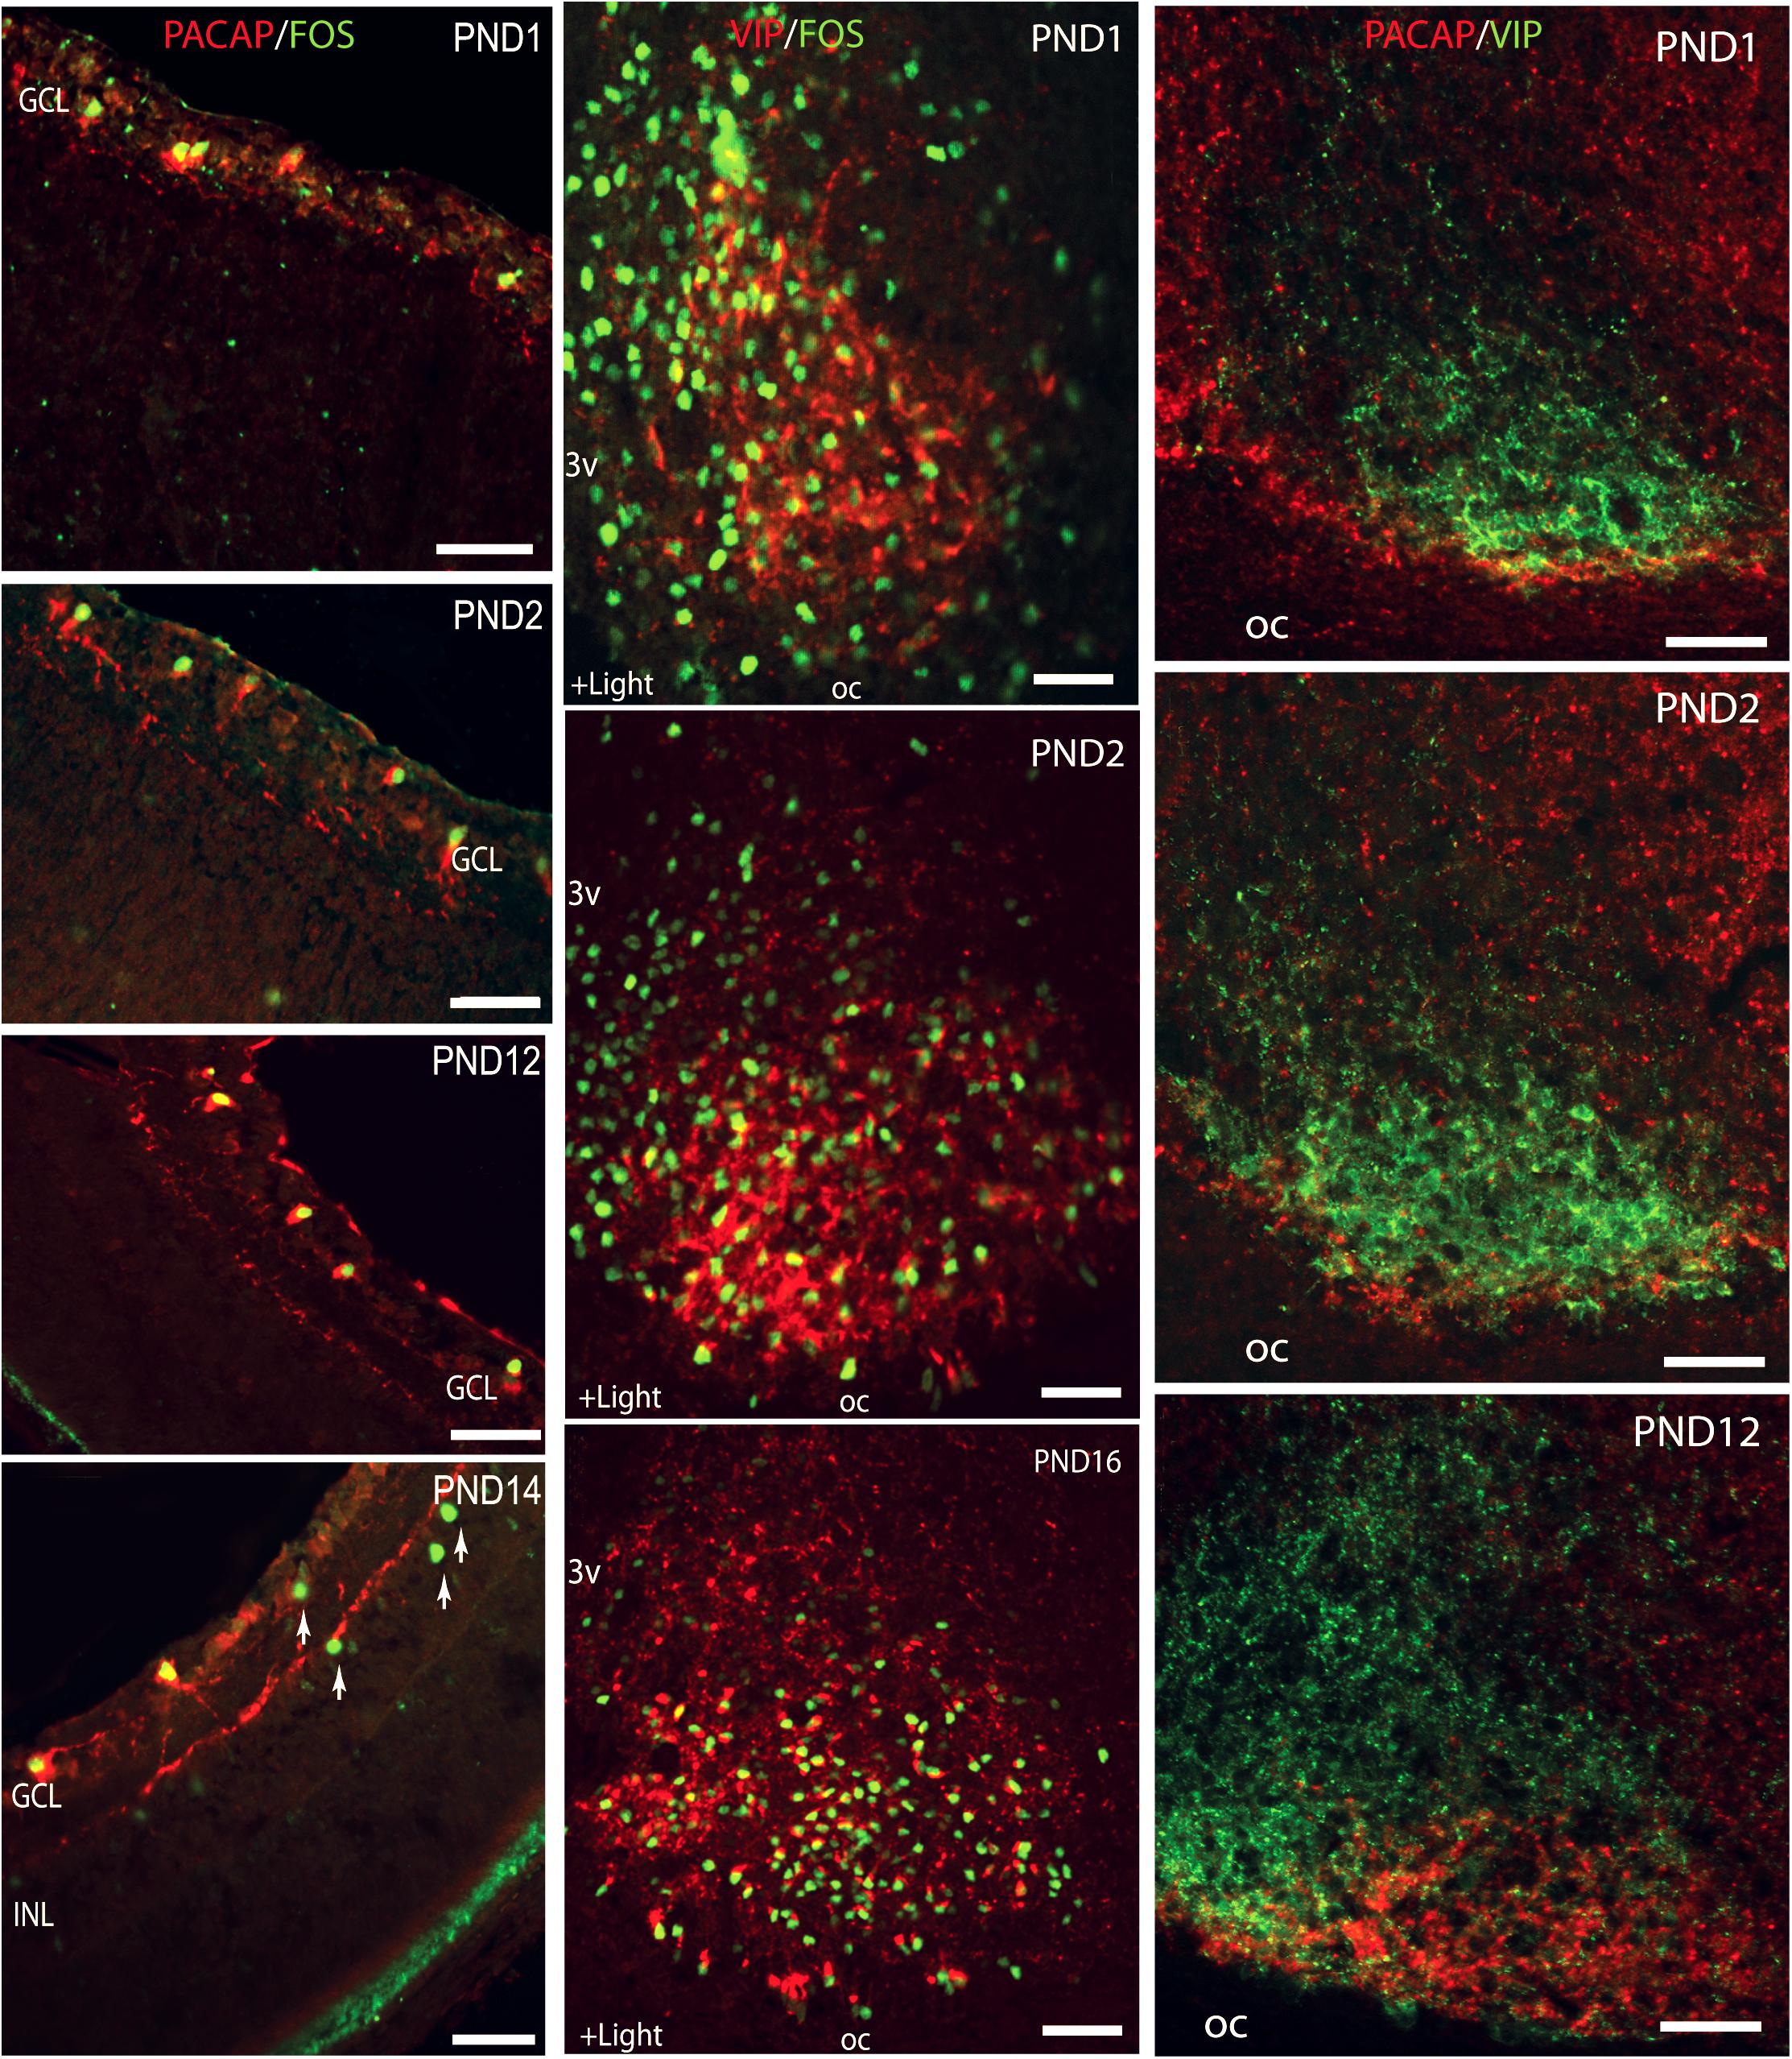 Vesicular glutamate transporter 2 (VGLUT2) is co-stored with PACAP in  projections from the rat melanopsin-containing retinal ganglion cells